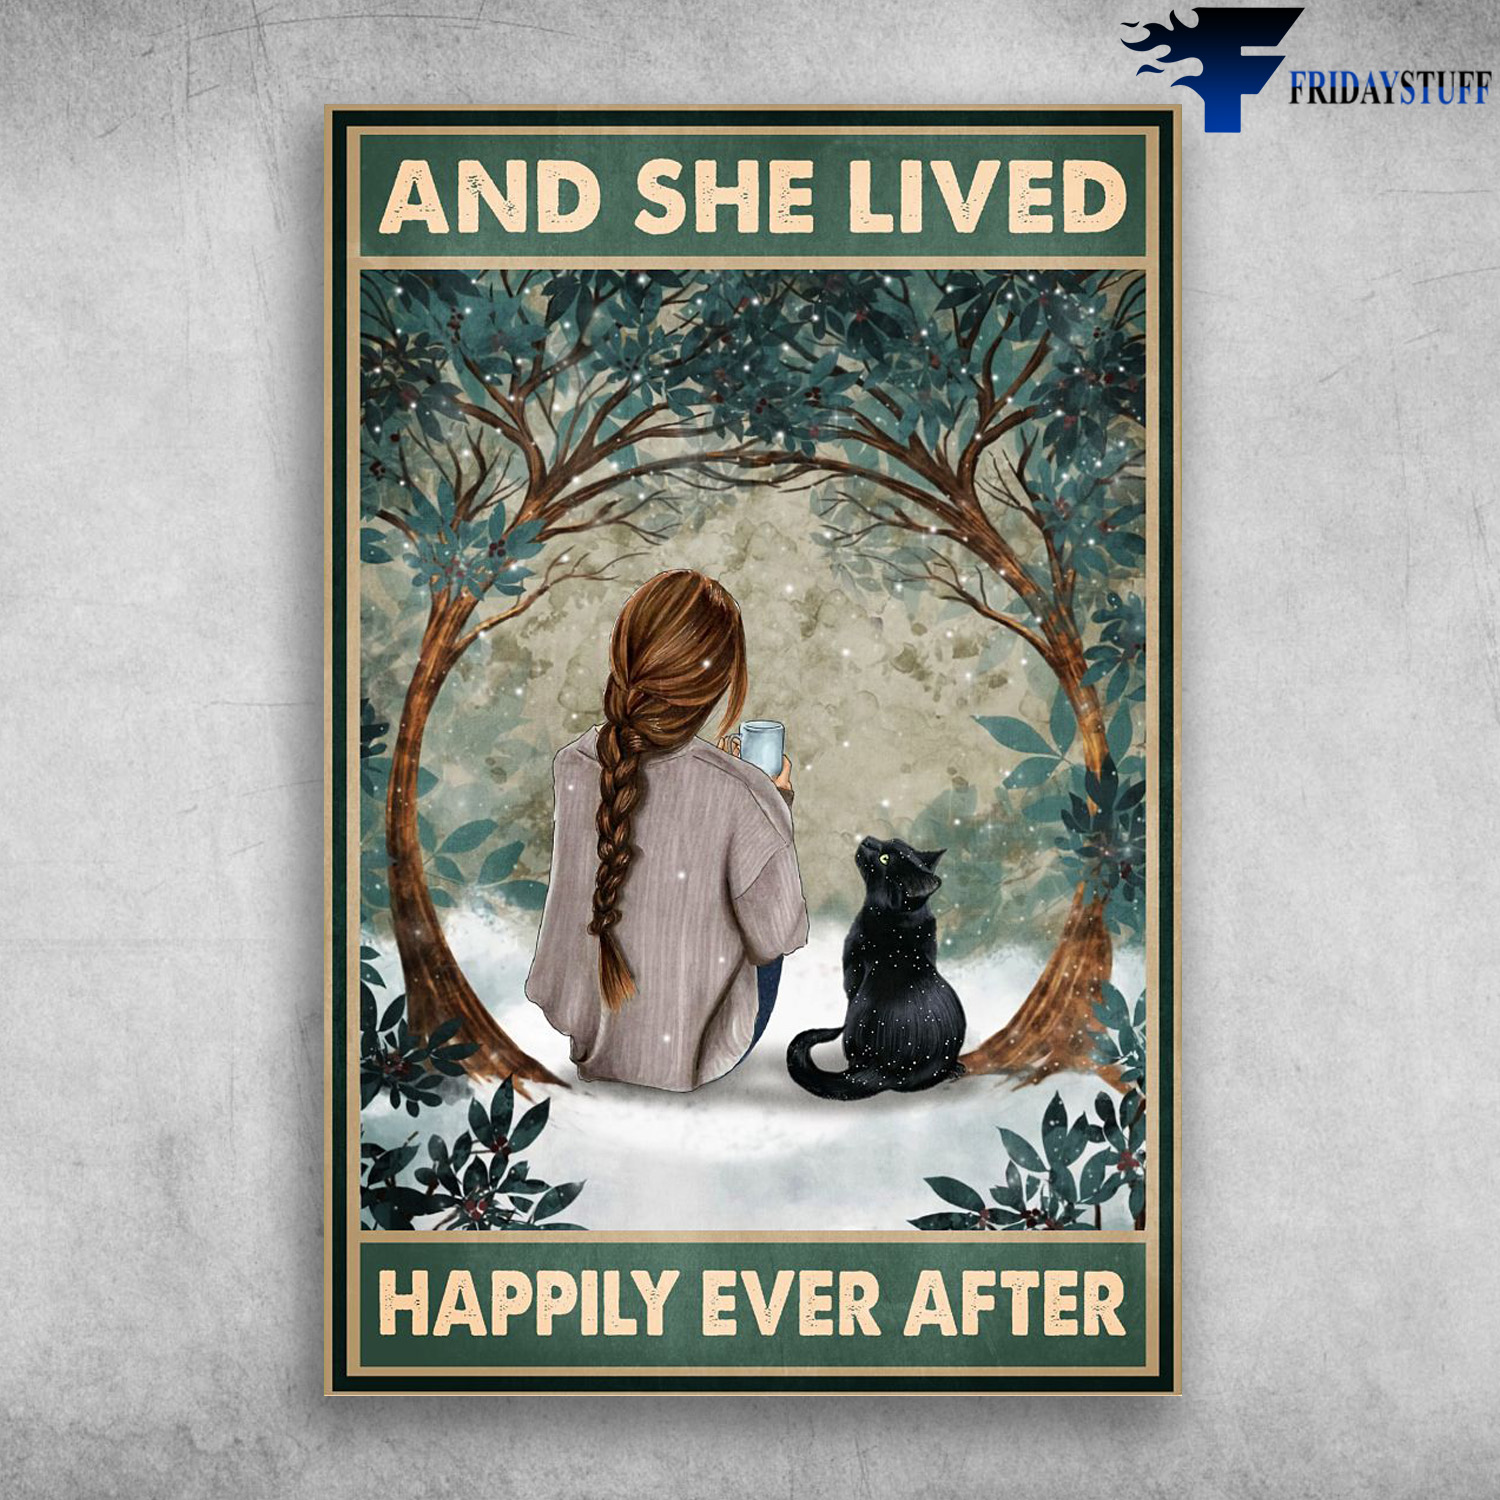 Girl With Black Cat - And She Lived, Happily Ever After